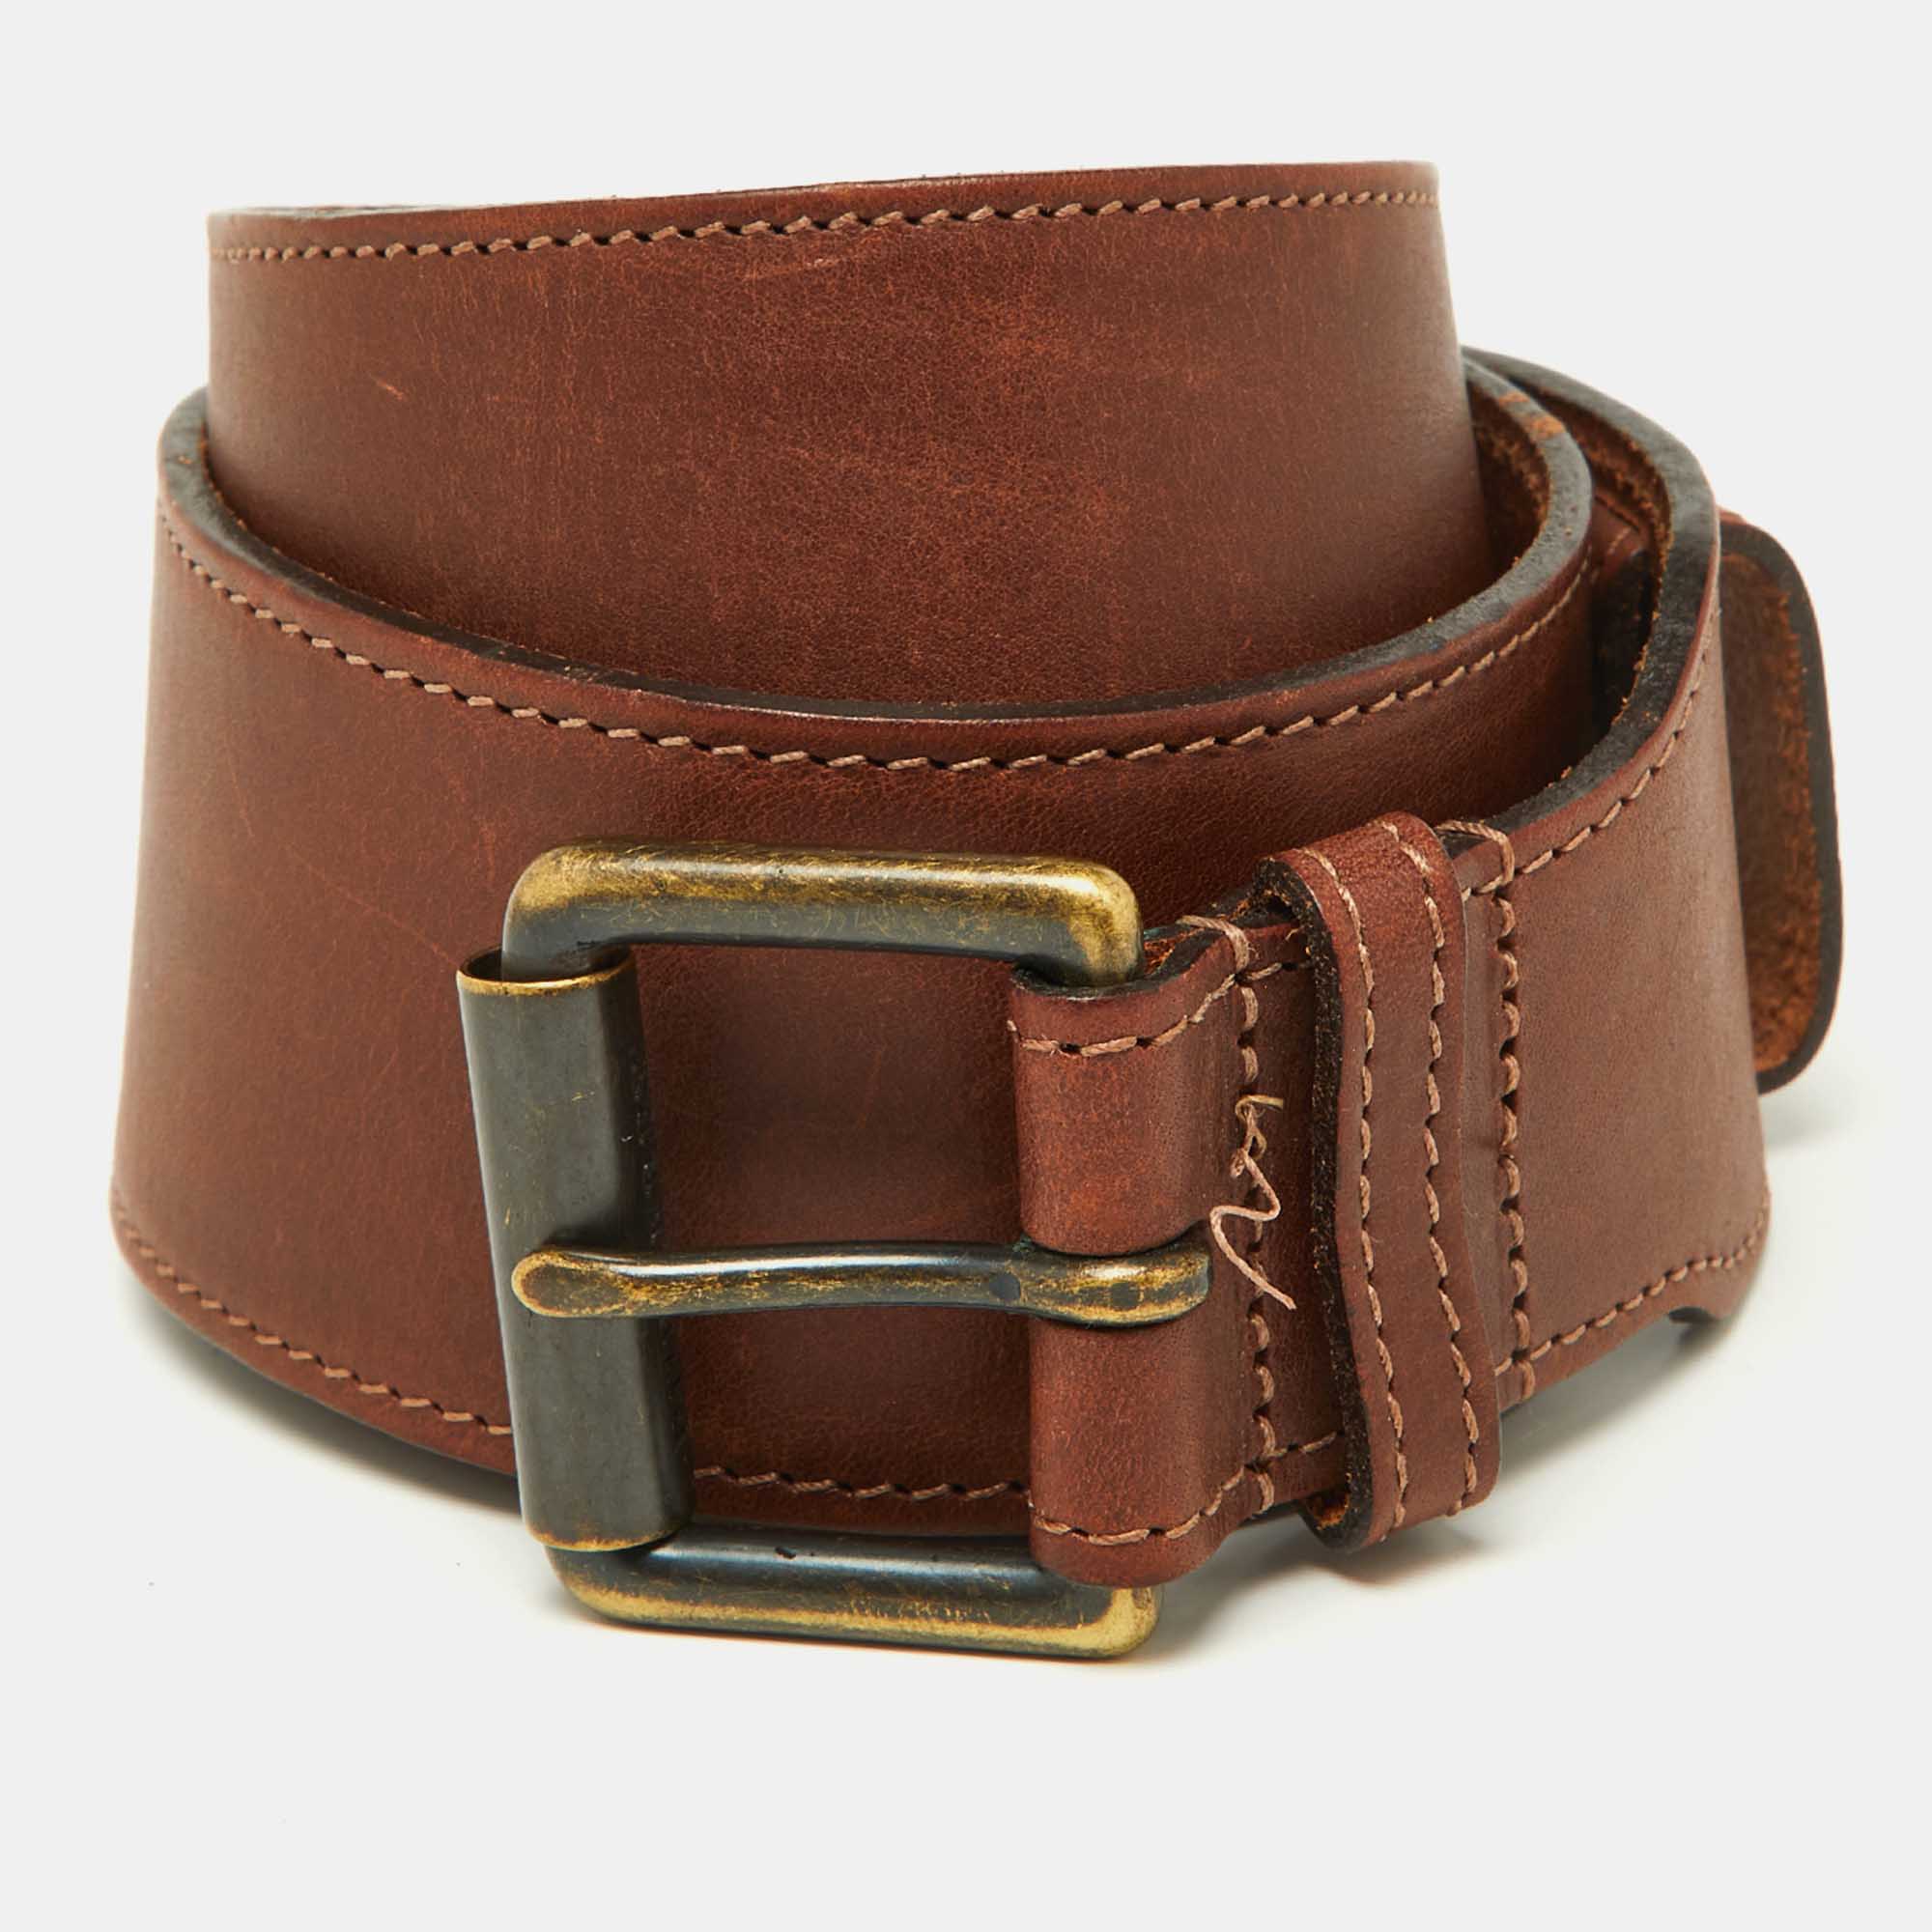 Burberry brown leather buckle belt 80cm